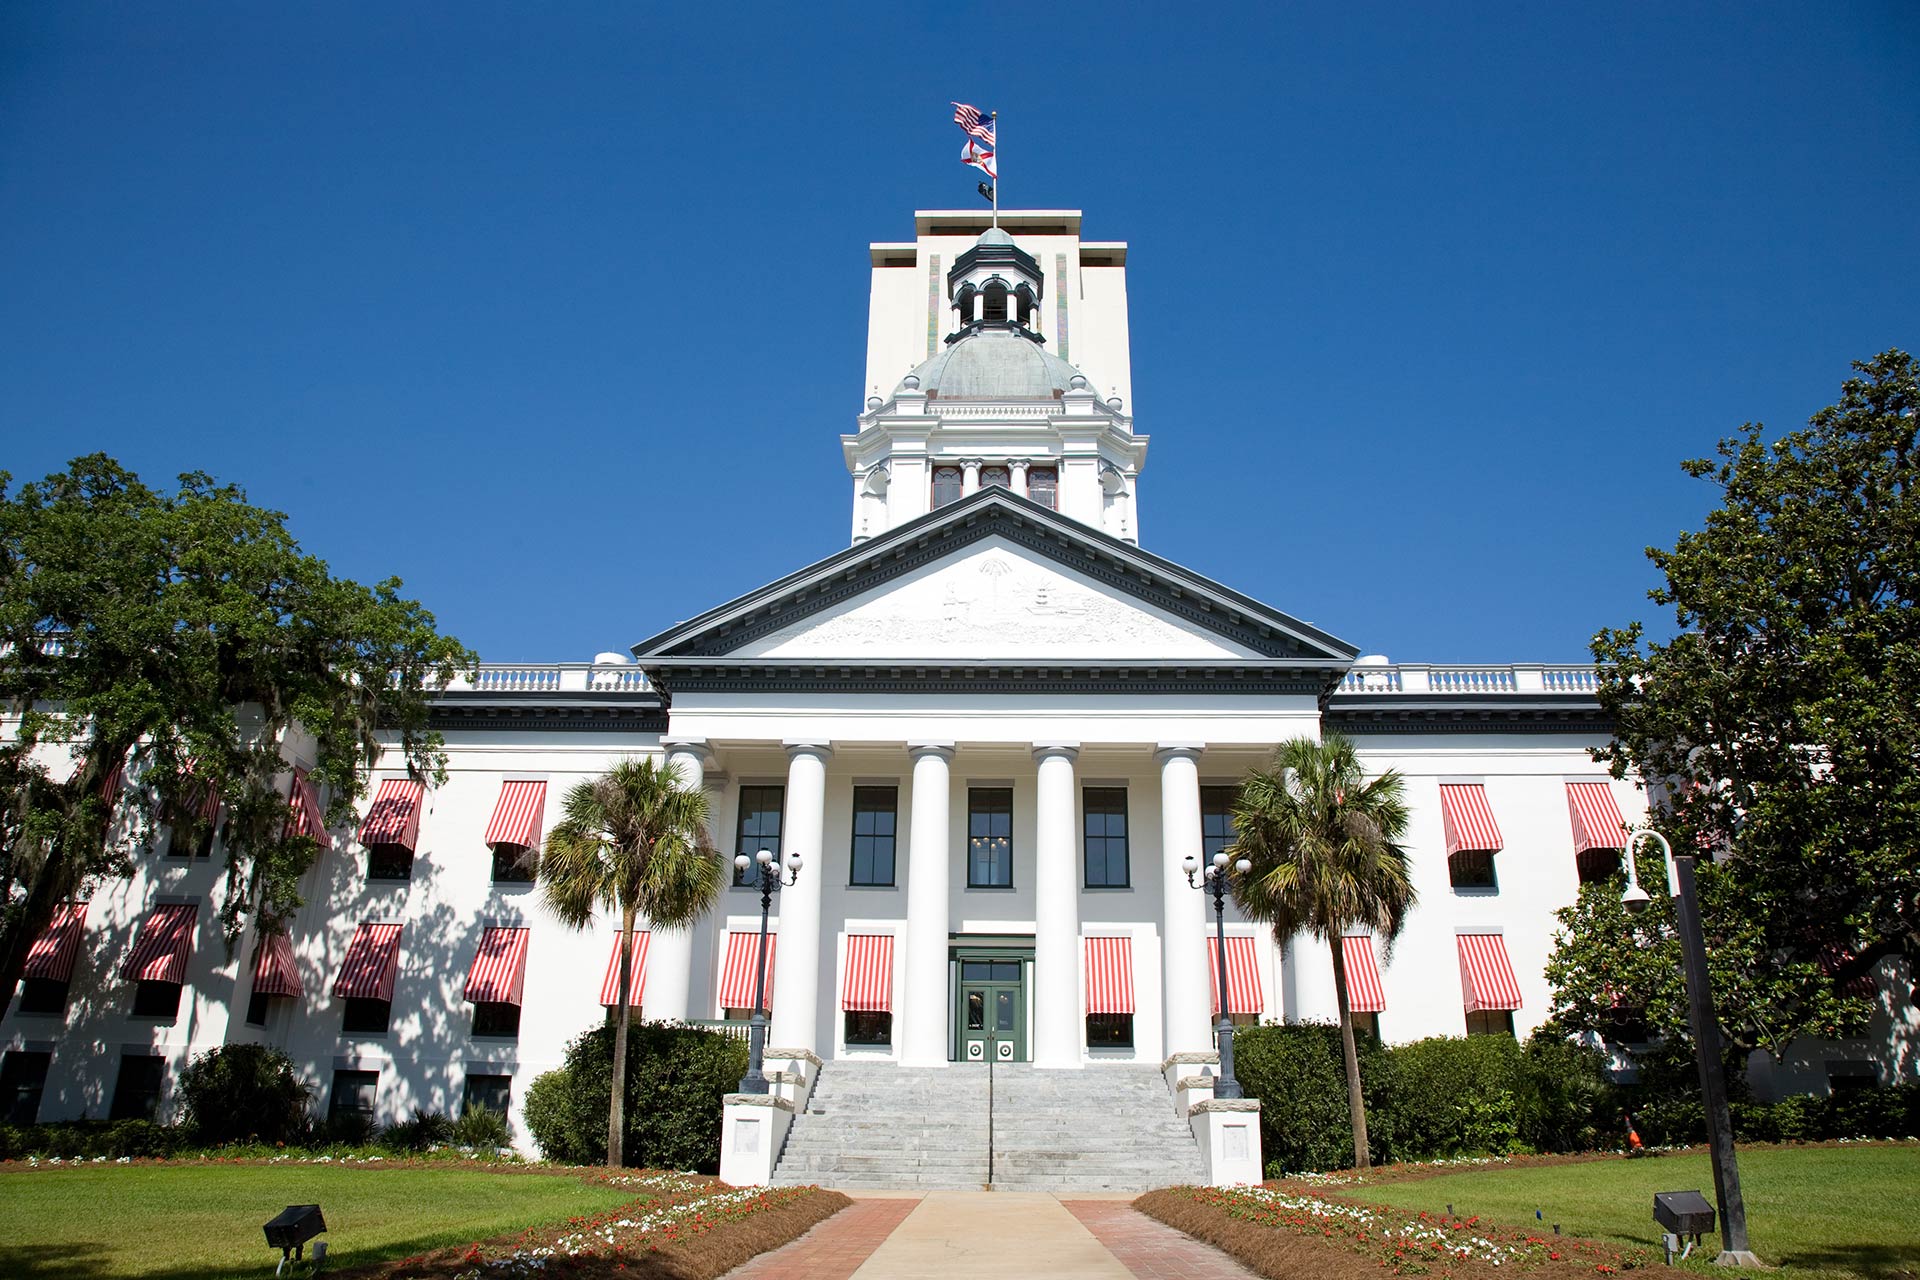 Florida Certificate of Status is an important document when expanding to another state